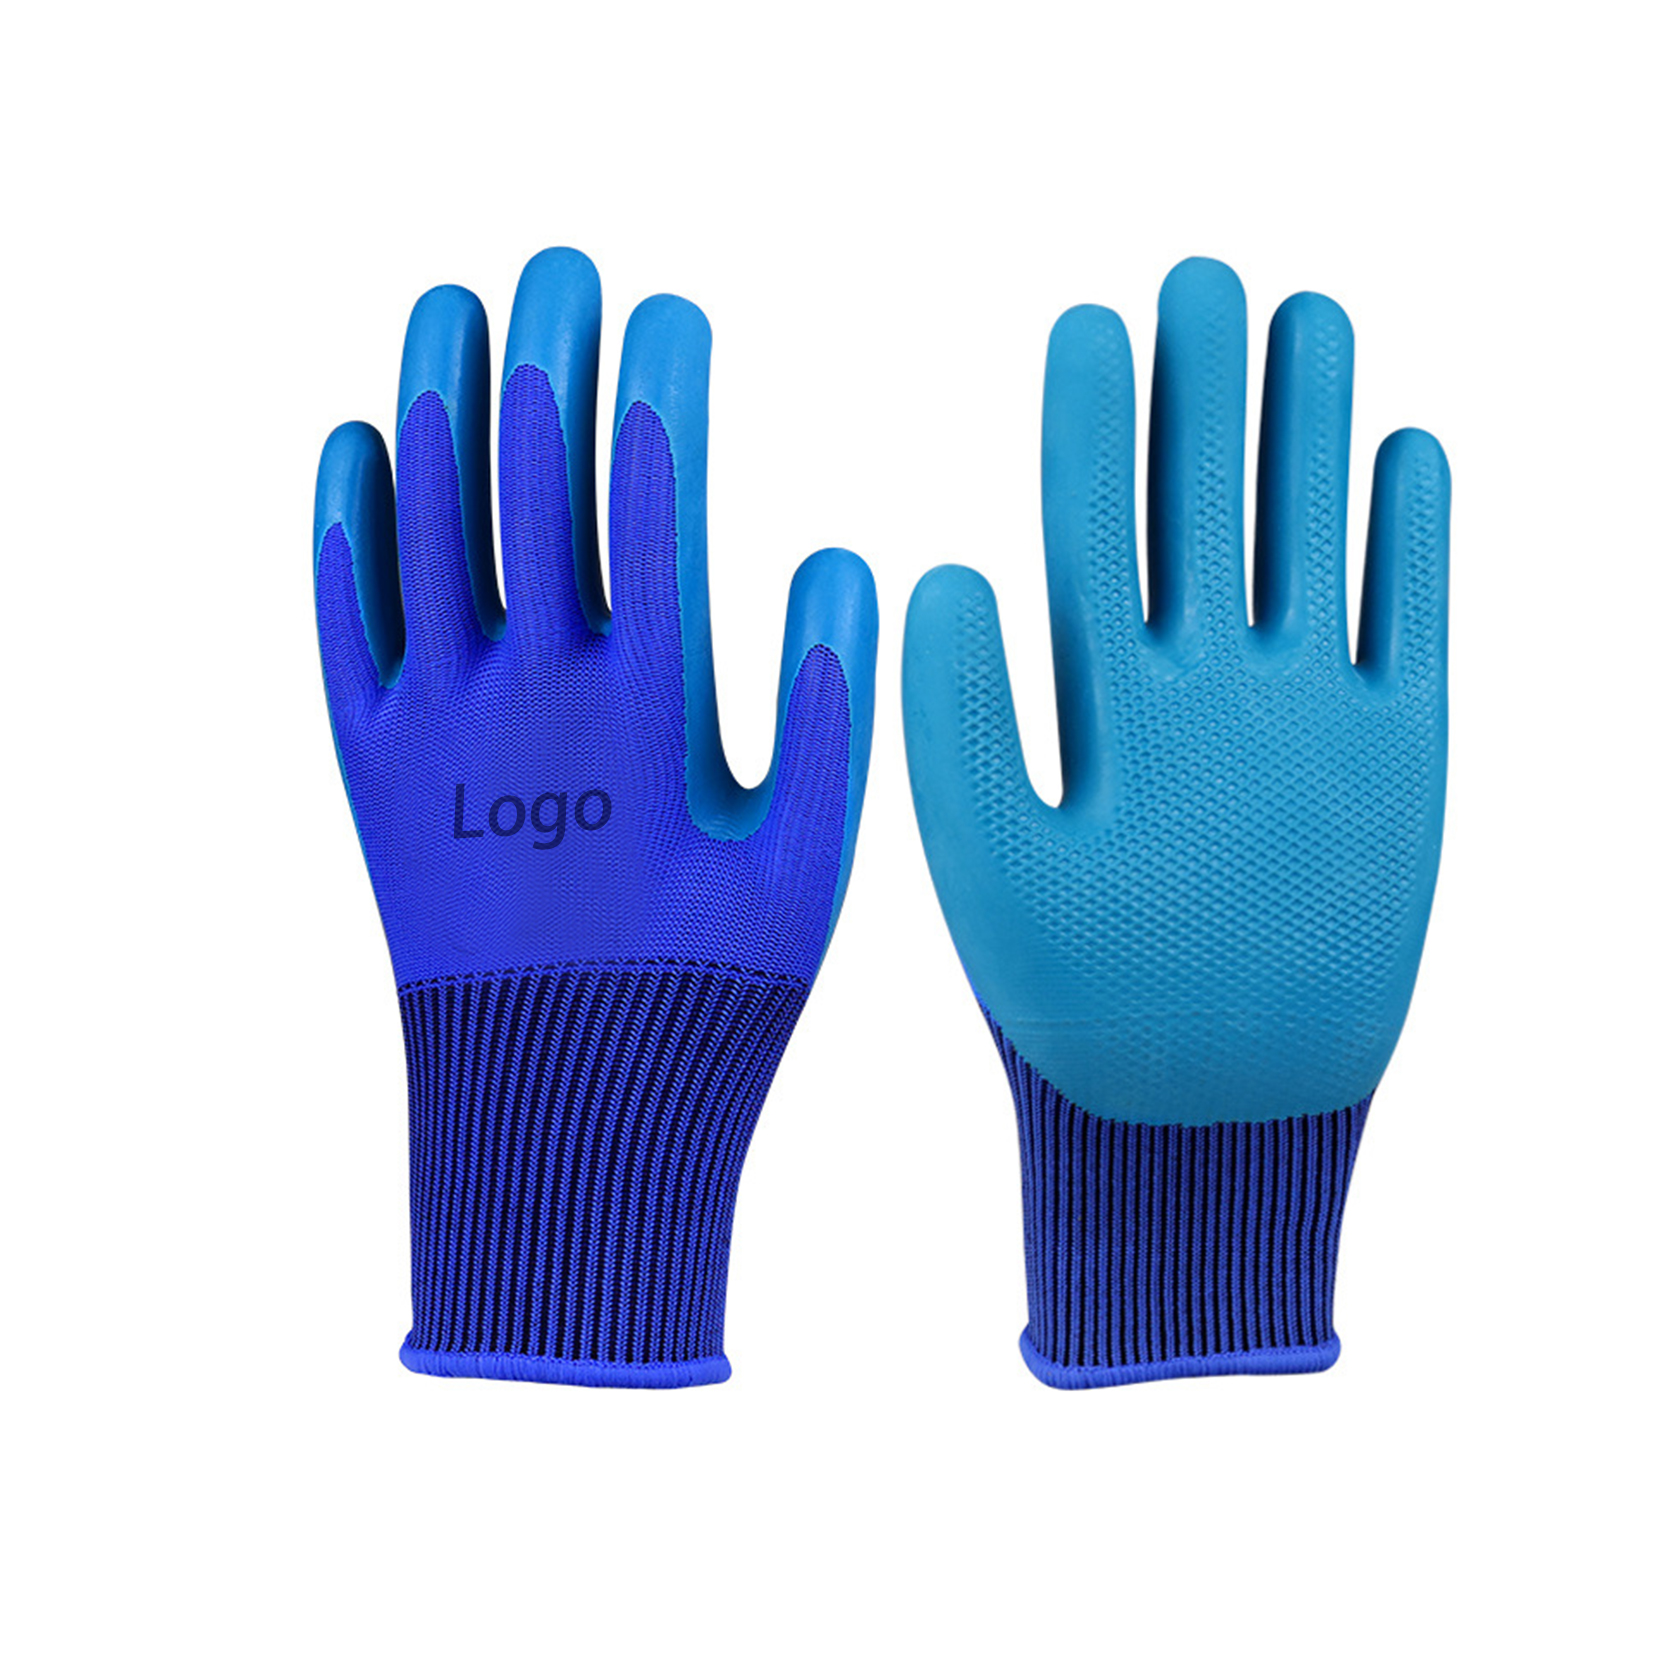 Large Rubber Latex Coated Work Gloves for Construction, gardening gloves, heavy duty gloves